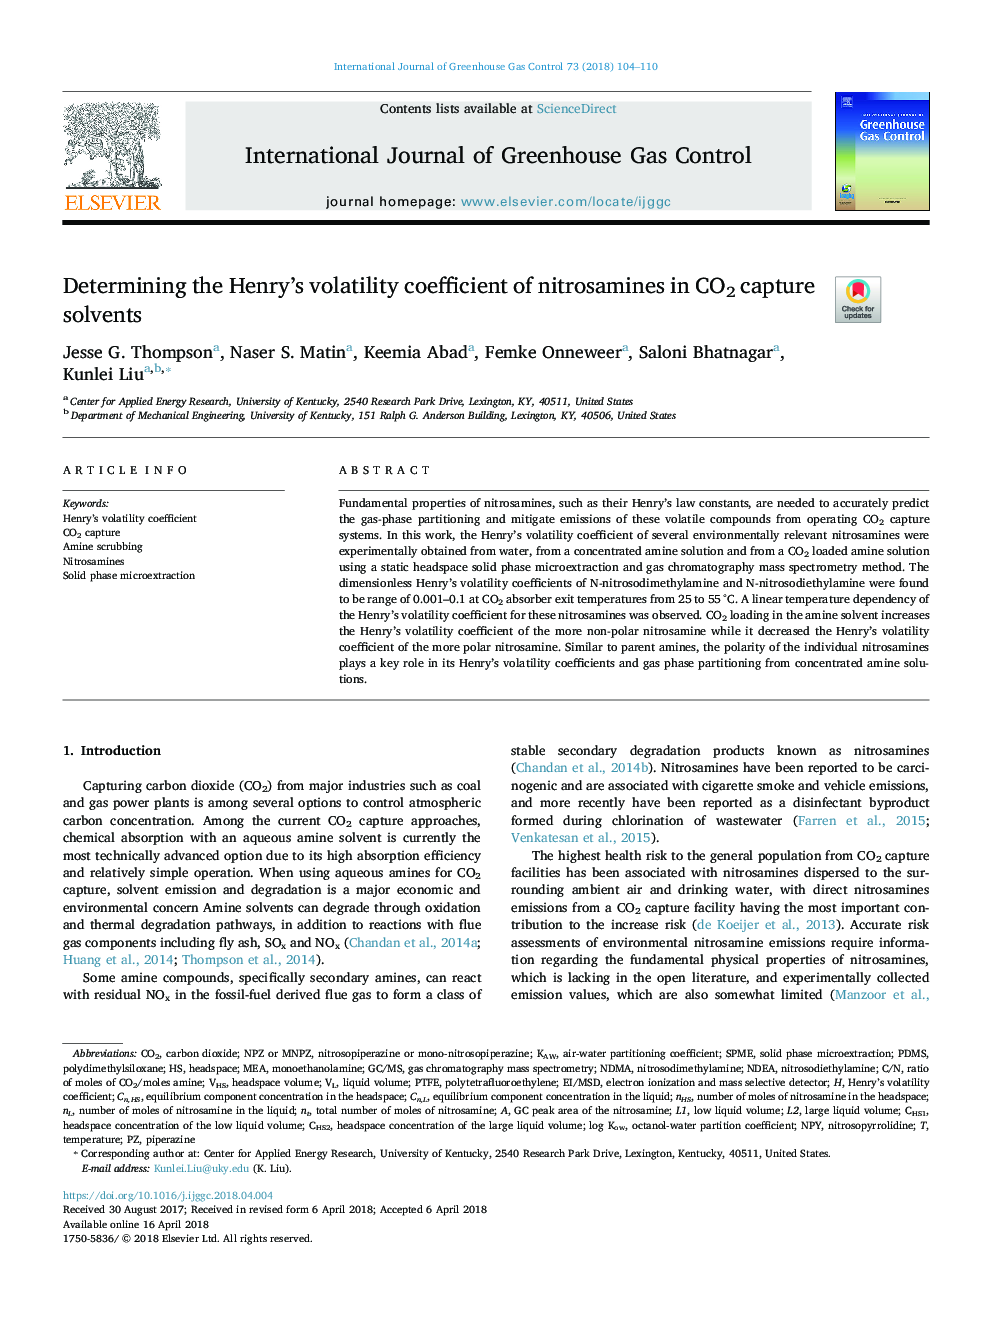 Determining the Henry's volatility coefficient of nitrosamines in CO2 capture solvents